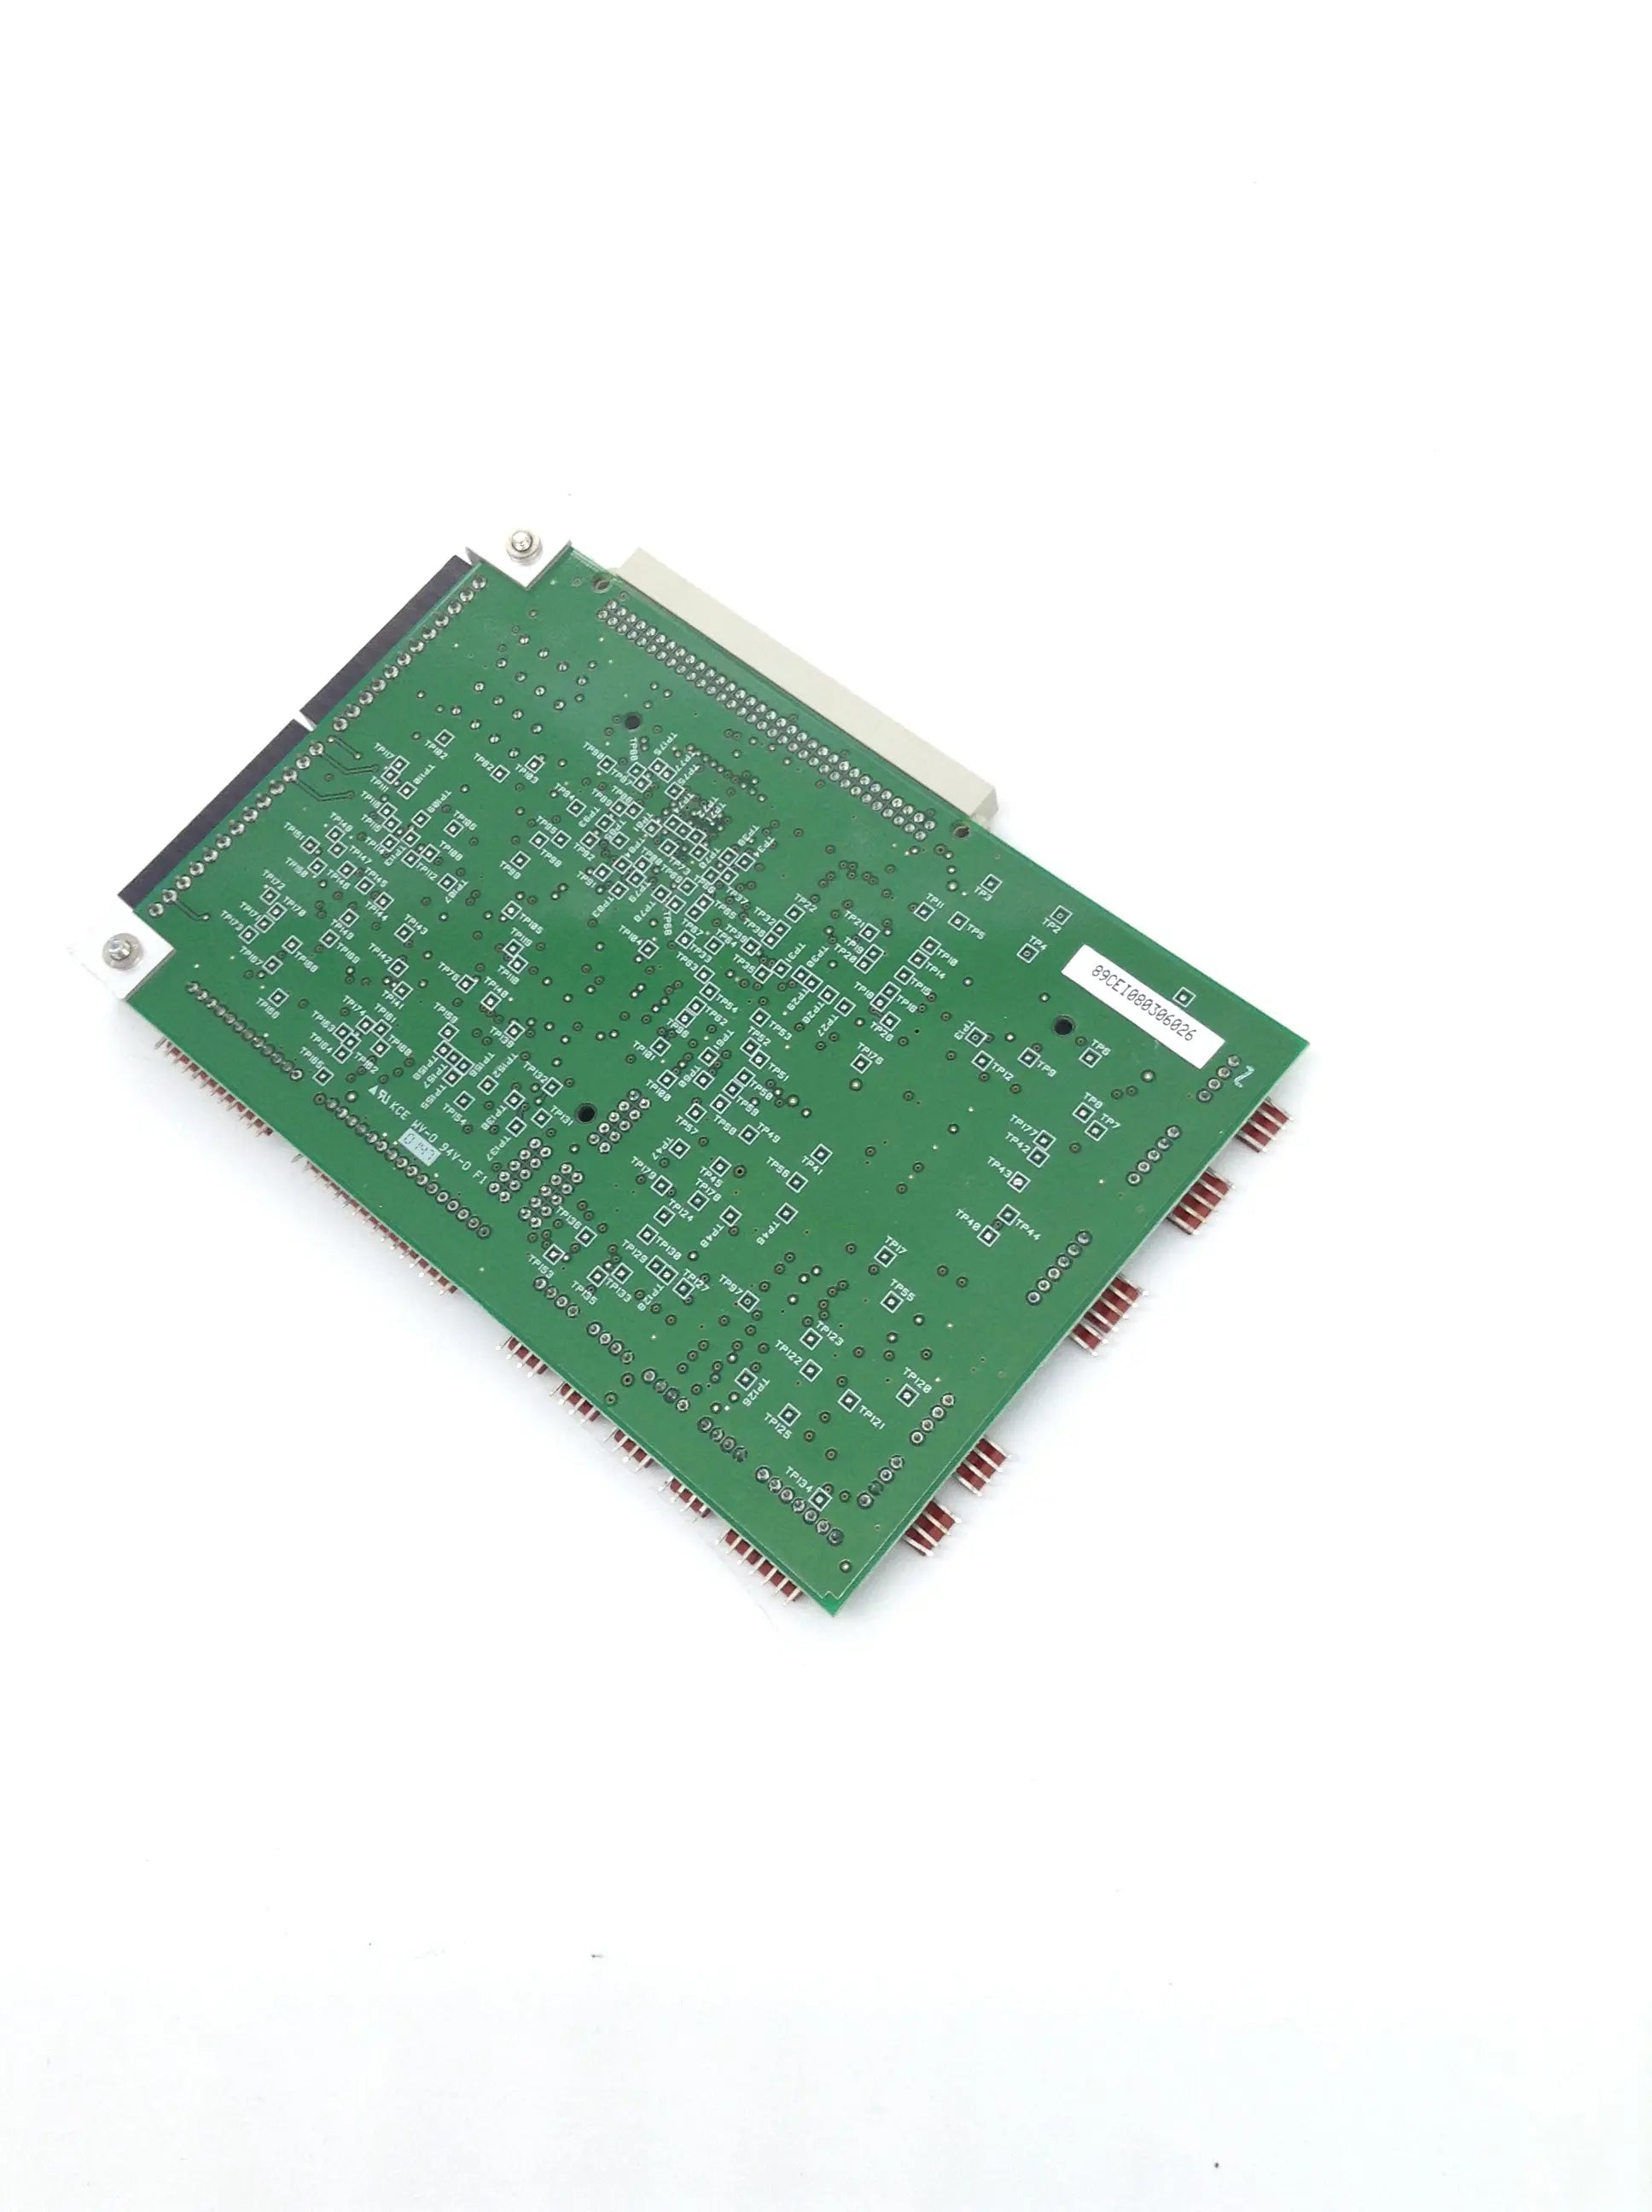 Load image into Gallery viewer, A Biomedical Service Perkin Elmer Board ASSY: M0413316 